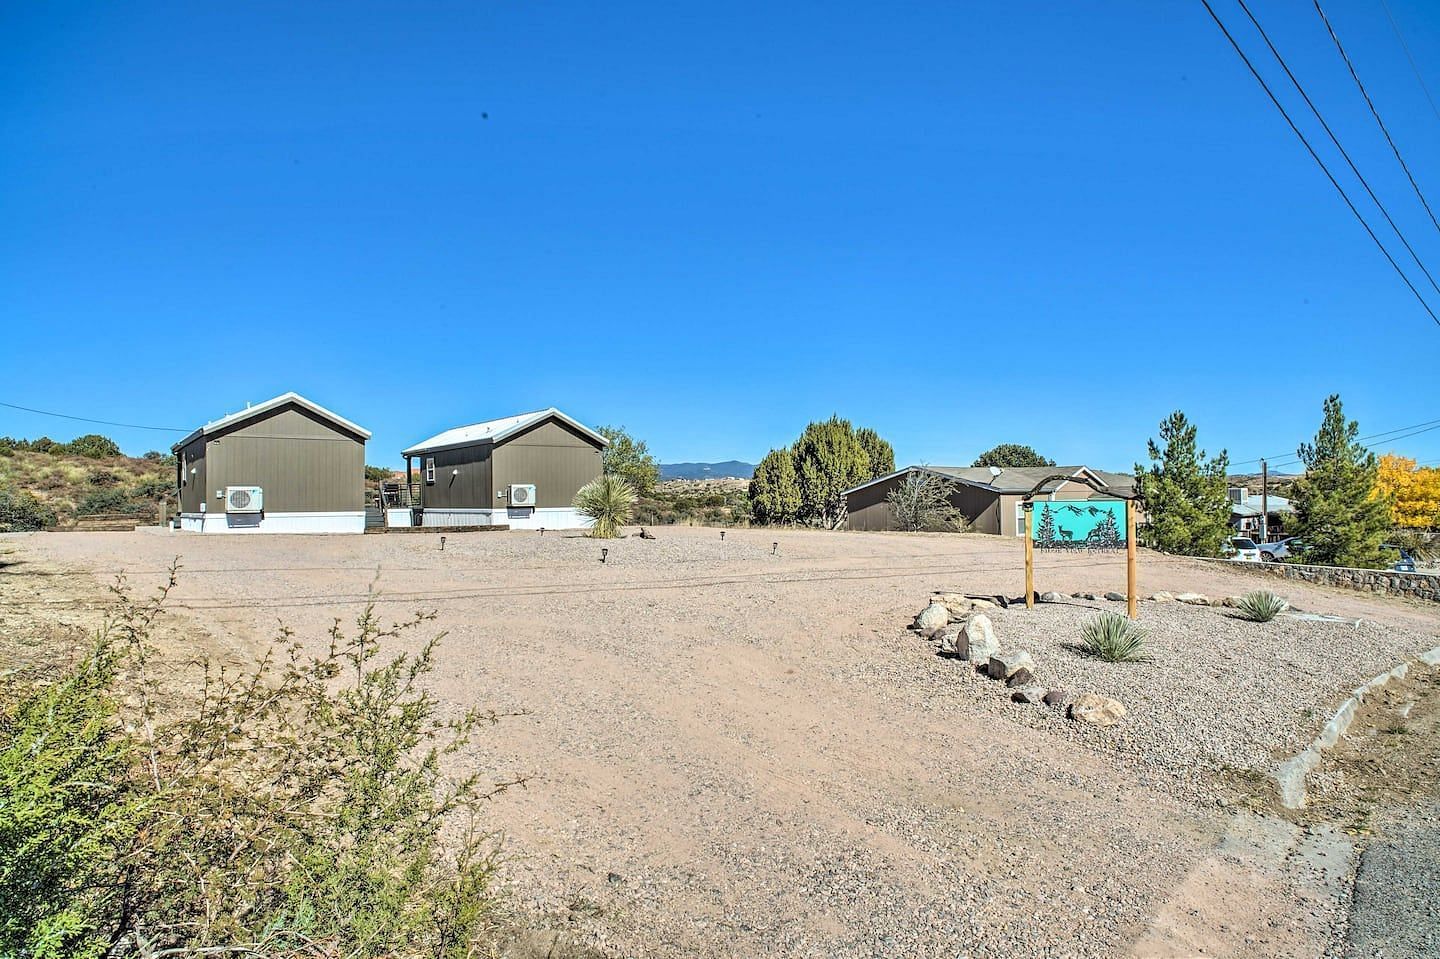 JWguest House at Silver City, New Mexico | Peaceful retreat next to Silver City Oasis 'Roadrunner' | Jwbnb no brobnb 20